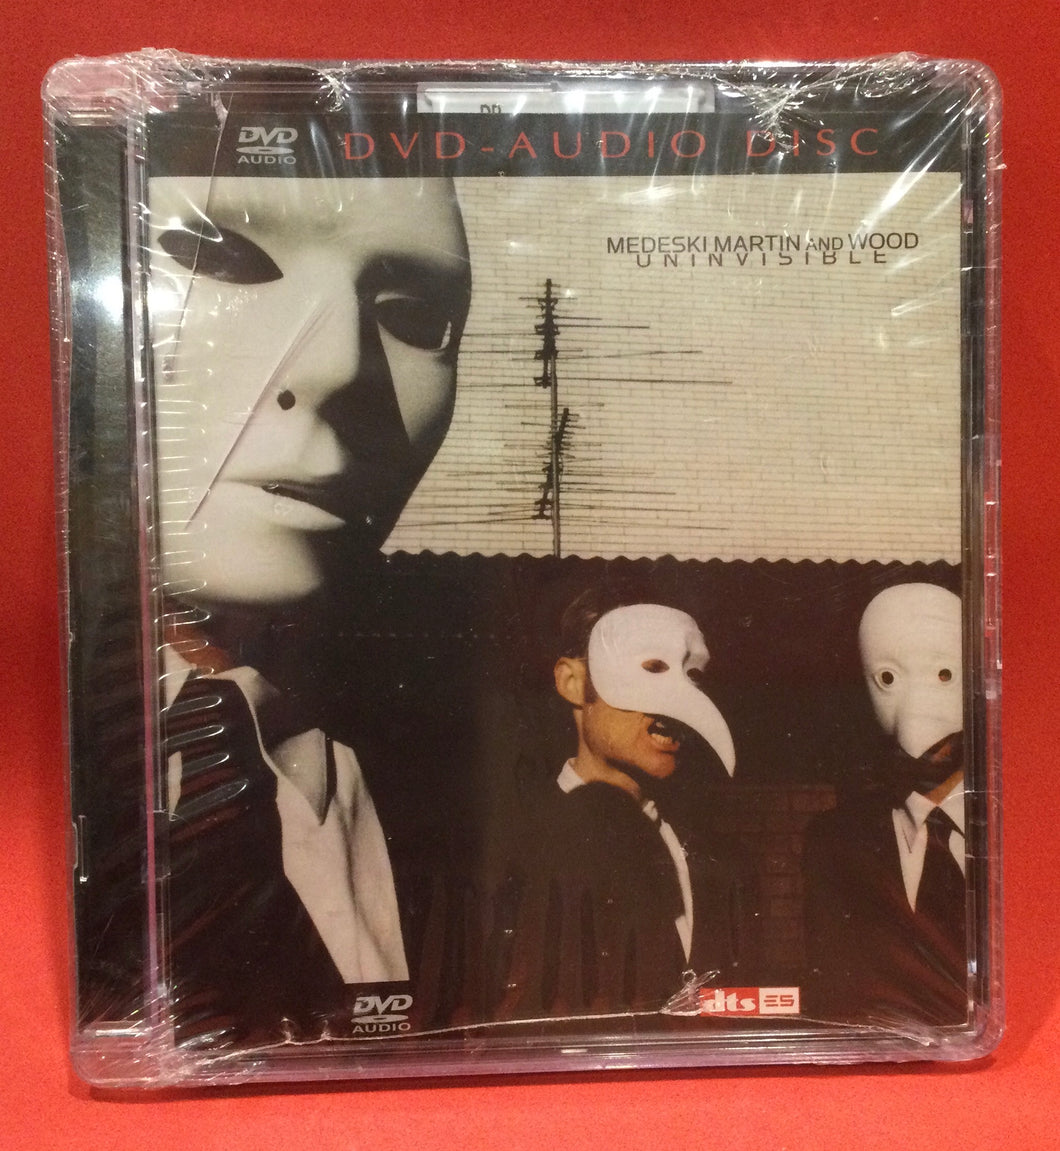 MEDESKI MARTIN AND WOOD - UNINVISIBLE - DVD-AUDIO DISC (SEALED)